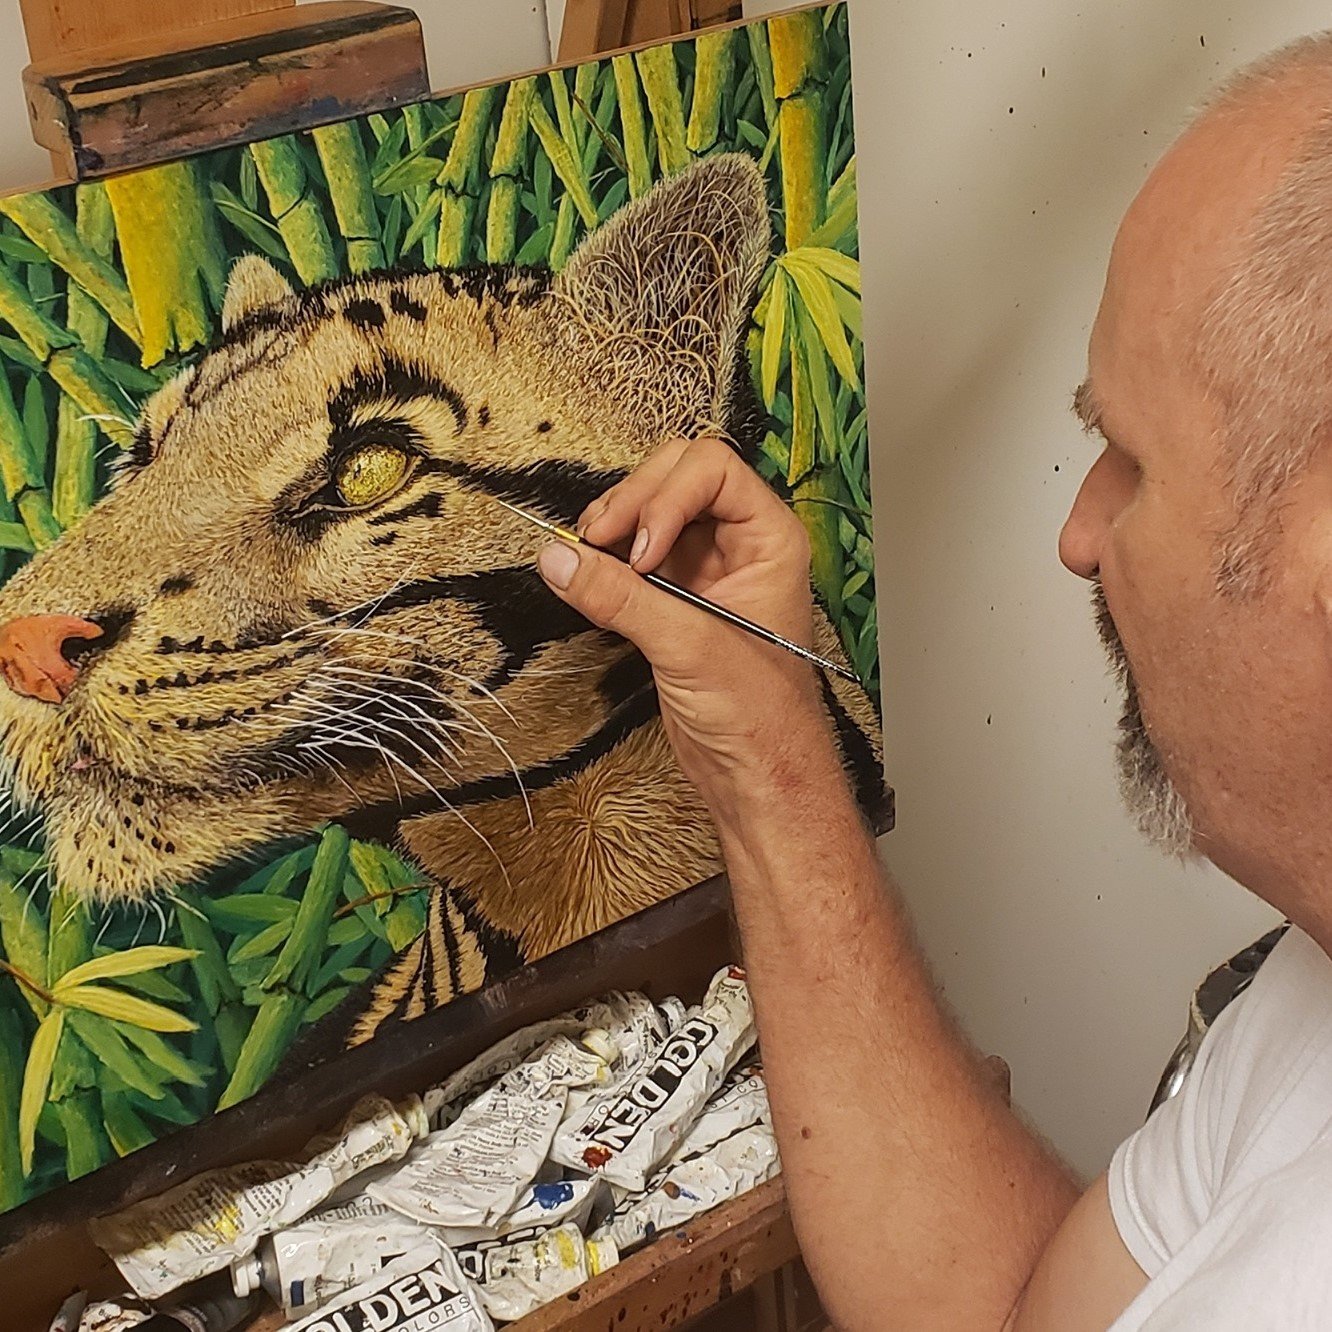 David Joyner has a bucket list of animals he wants to paint at least once during his lifetime.